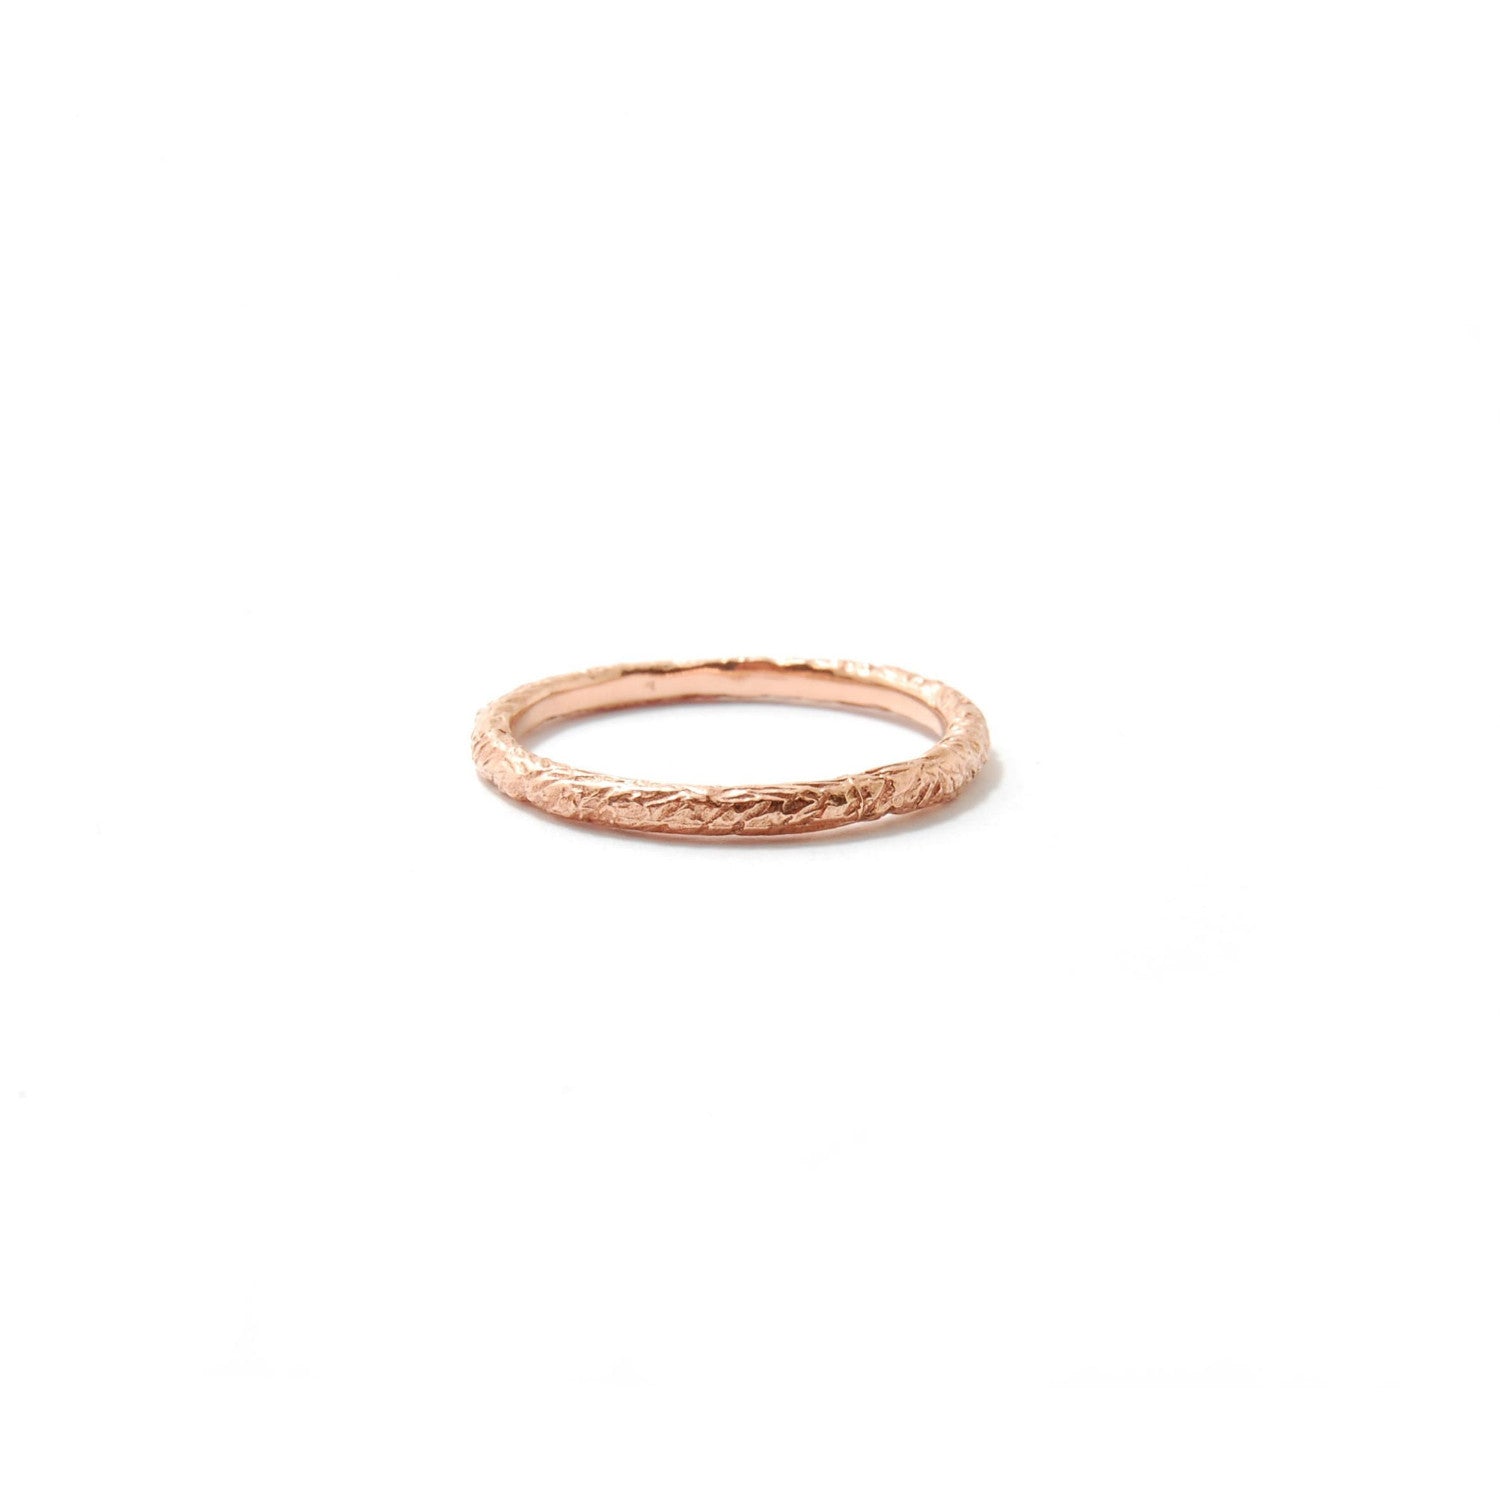 Feathered Stackable Ring Round Profile